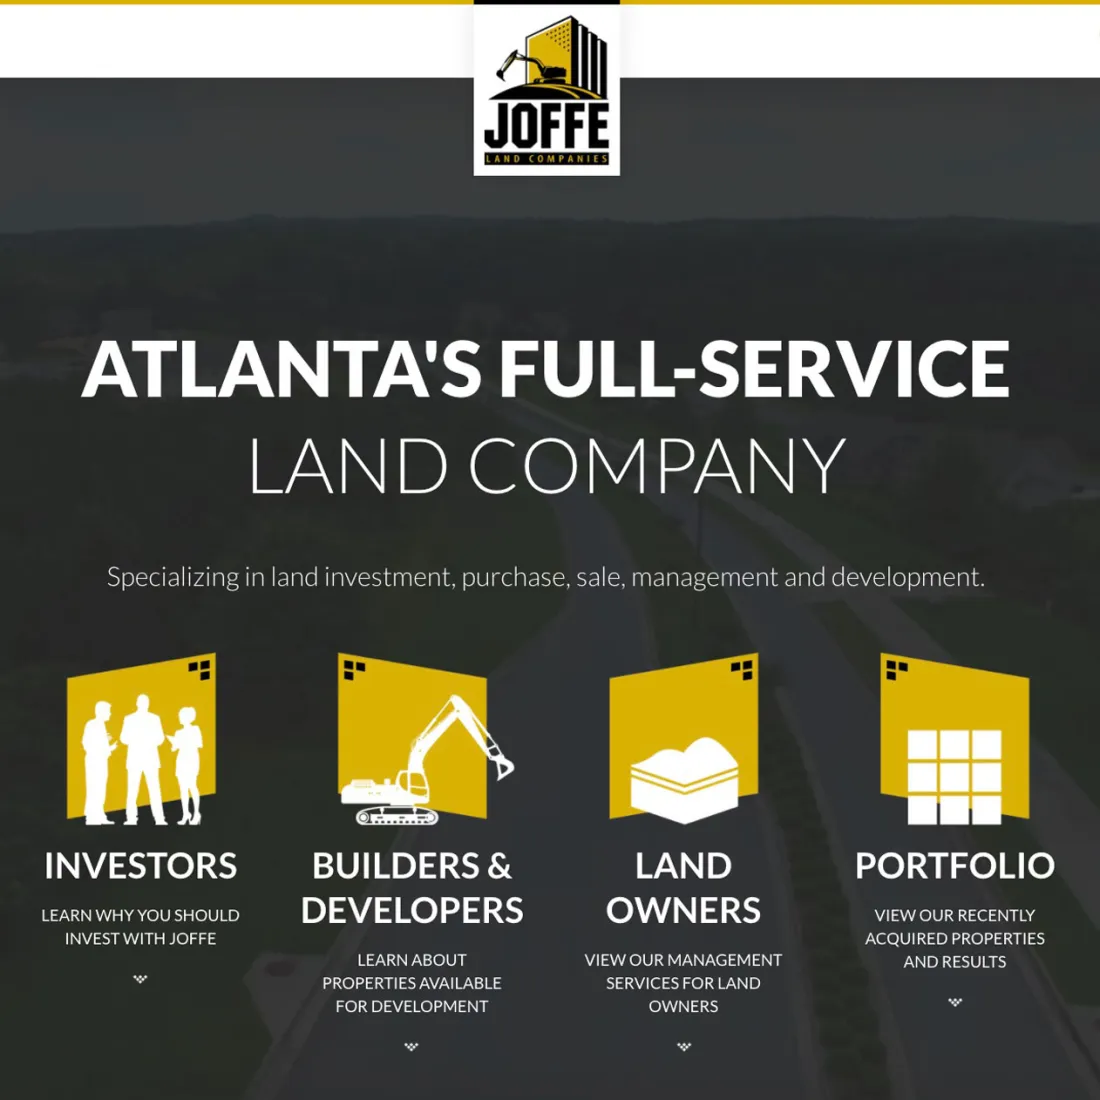 Image of website for Joffe Land Companies